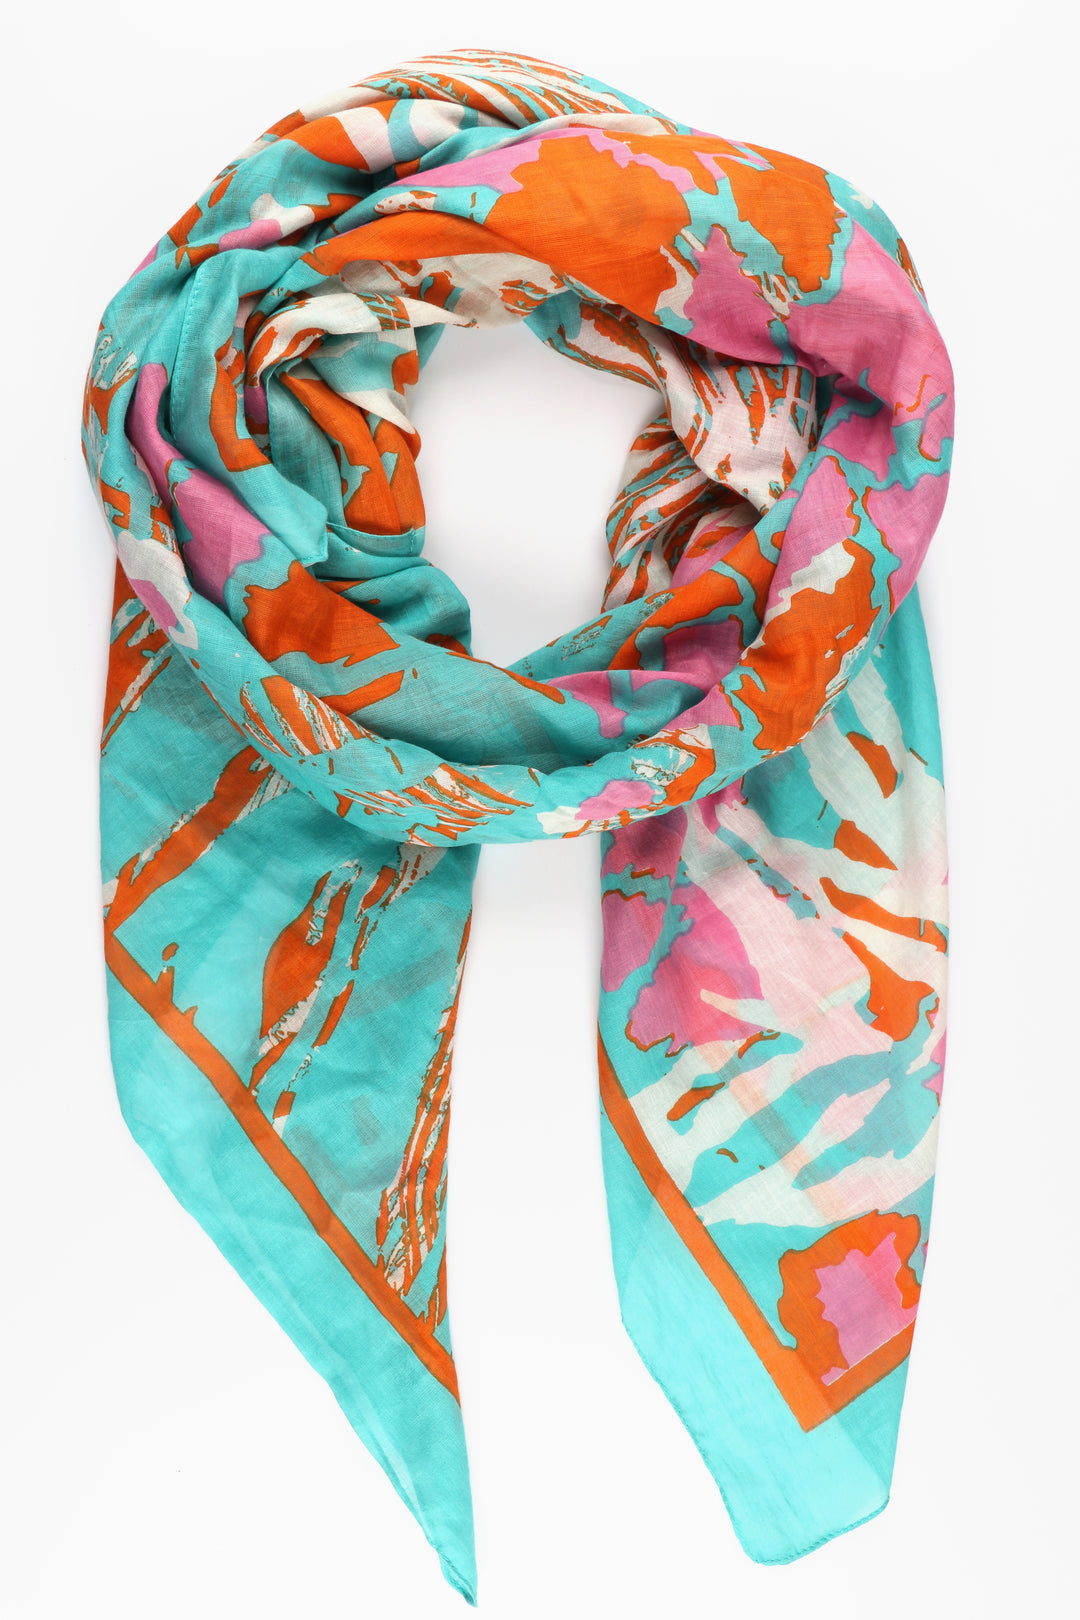 Abstract Leaf Print Cotton Scarf with Contrasting Layered Animal Print in Turquoise